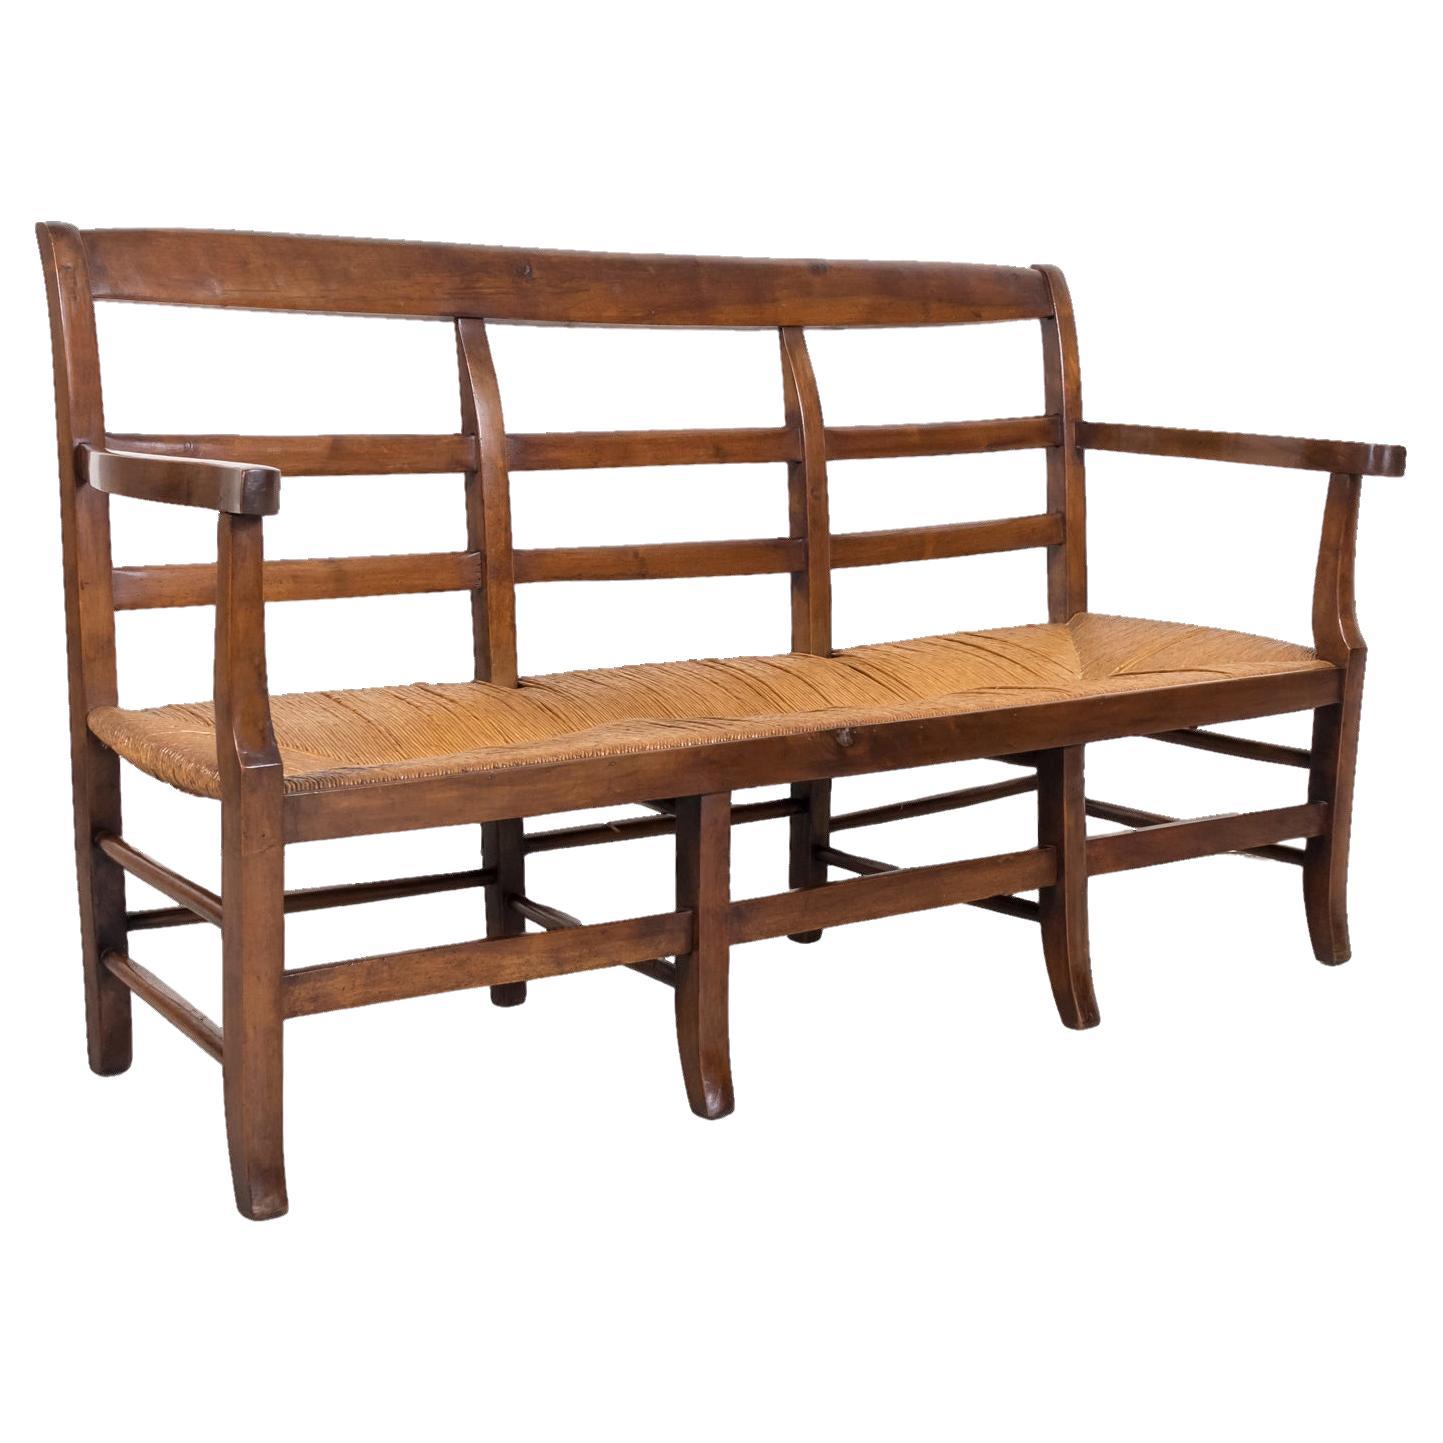 Mid-19th Century French Radassier or Ladder Back Rush Seat Bench